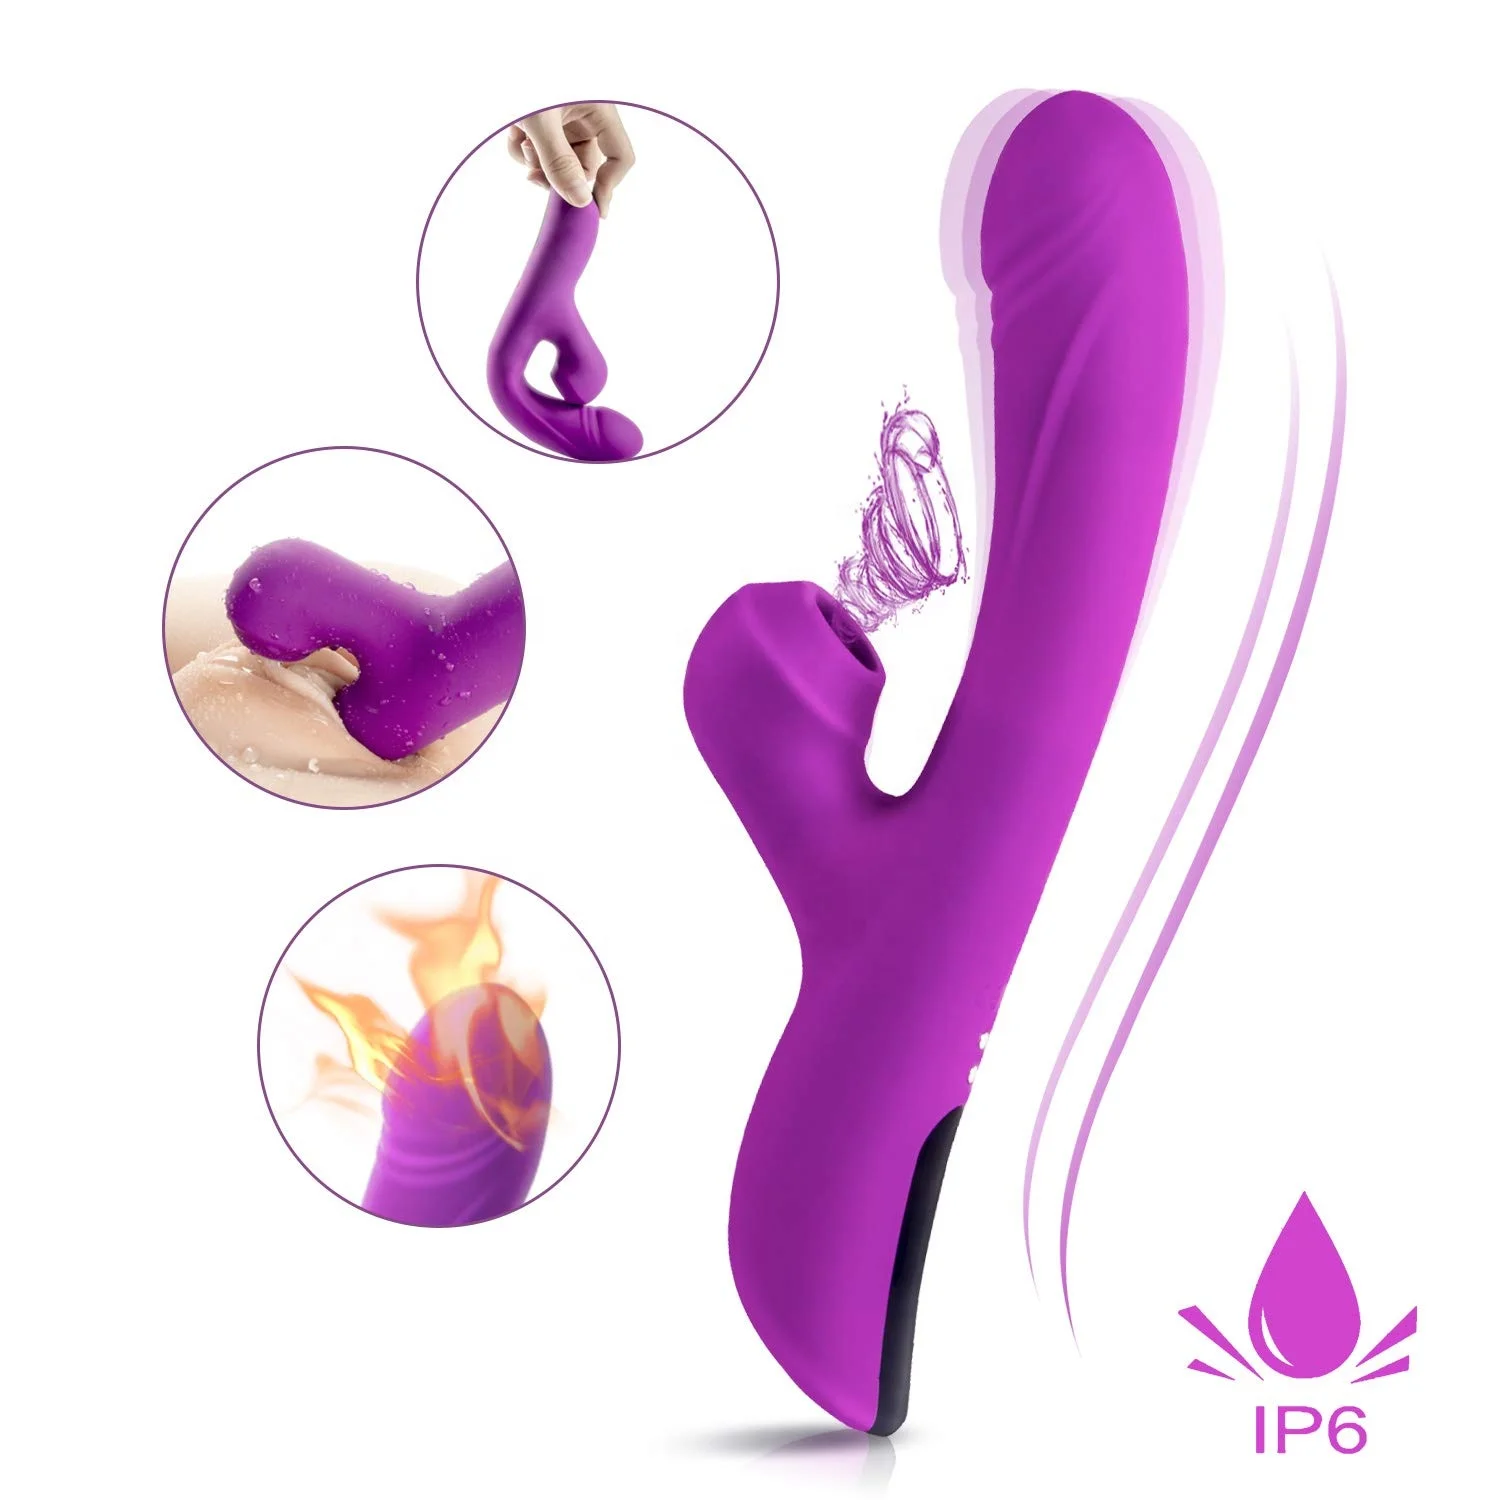 2022 Best Vibrator For Women Clitoral Sucking G-spot Rabbit Vibrator For Pussy  Adult Toy Sex Bullet Vibrator Vagina Massage Wand - Buy Vagina Vibrator For  Masturbation,Rotating G-spot Rabbit Vibrator,Japanese Massage Wand Vibrator